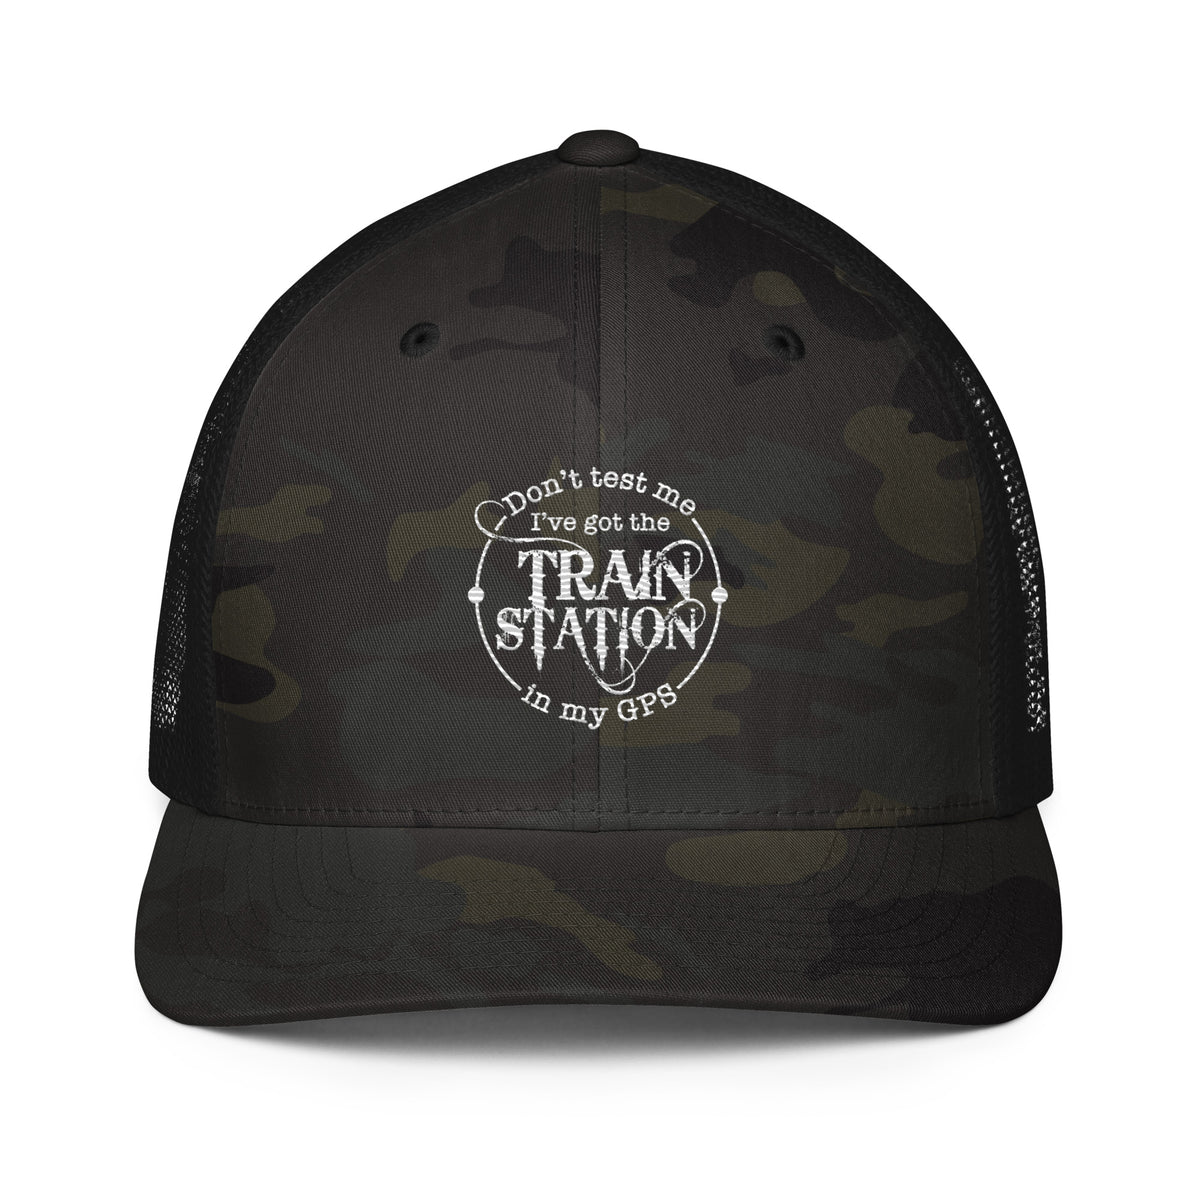 Don't Test me I got the Train Station in my GPS Trucker Hat